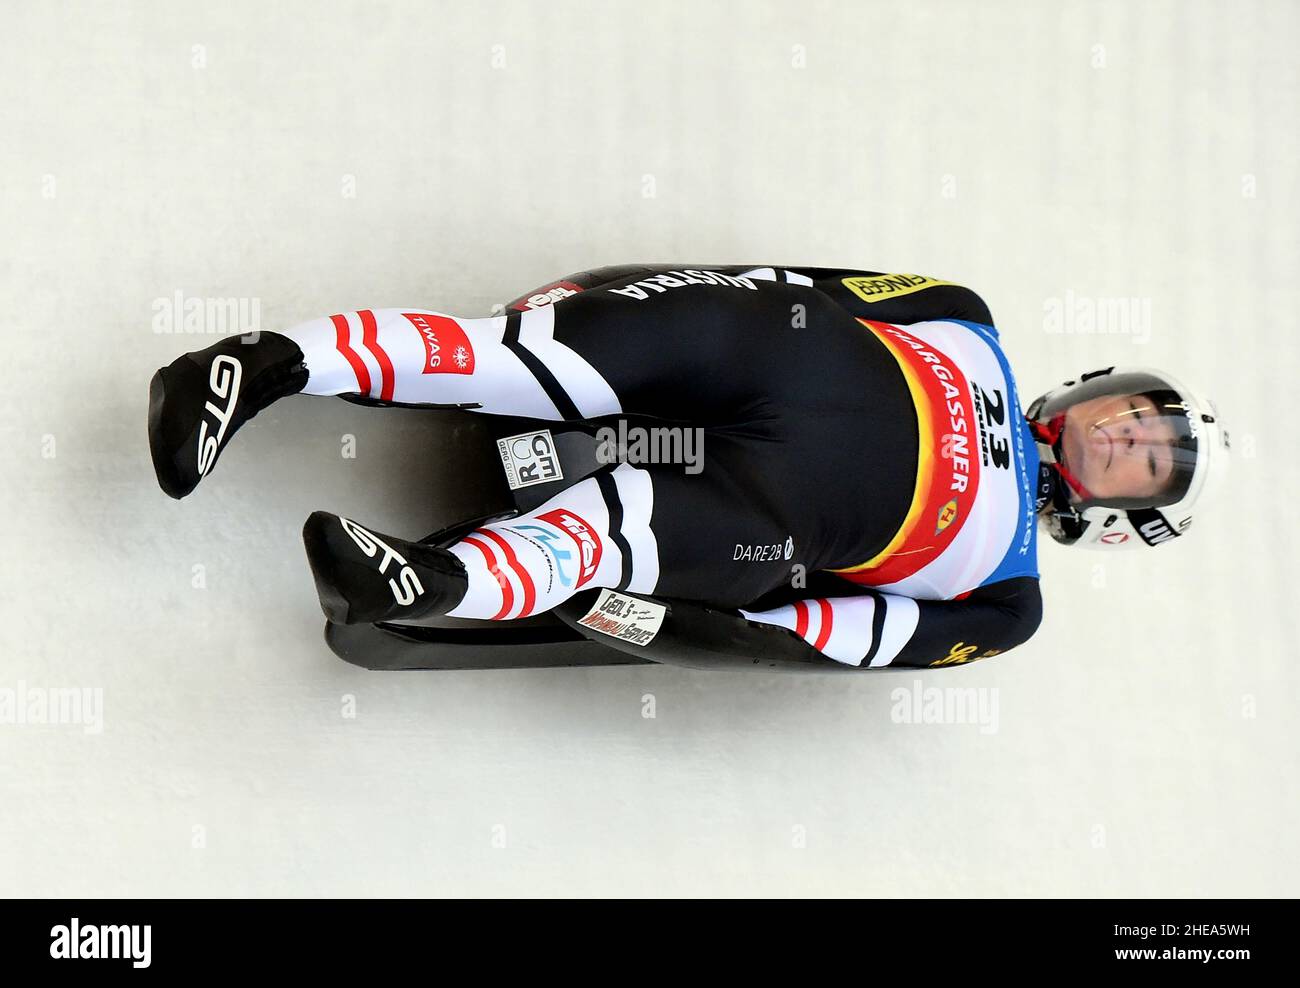 Sigulda, Latvia. 9th Jan, 2022. Madeleine Egle of Austria competes during the women's single race at the FIL Luge World Cup in Sigulda, Latvia, Jan. 9, 2022. Credit: Edijs Palens/Xinhua/Alamy Live News Stock Photo